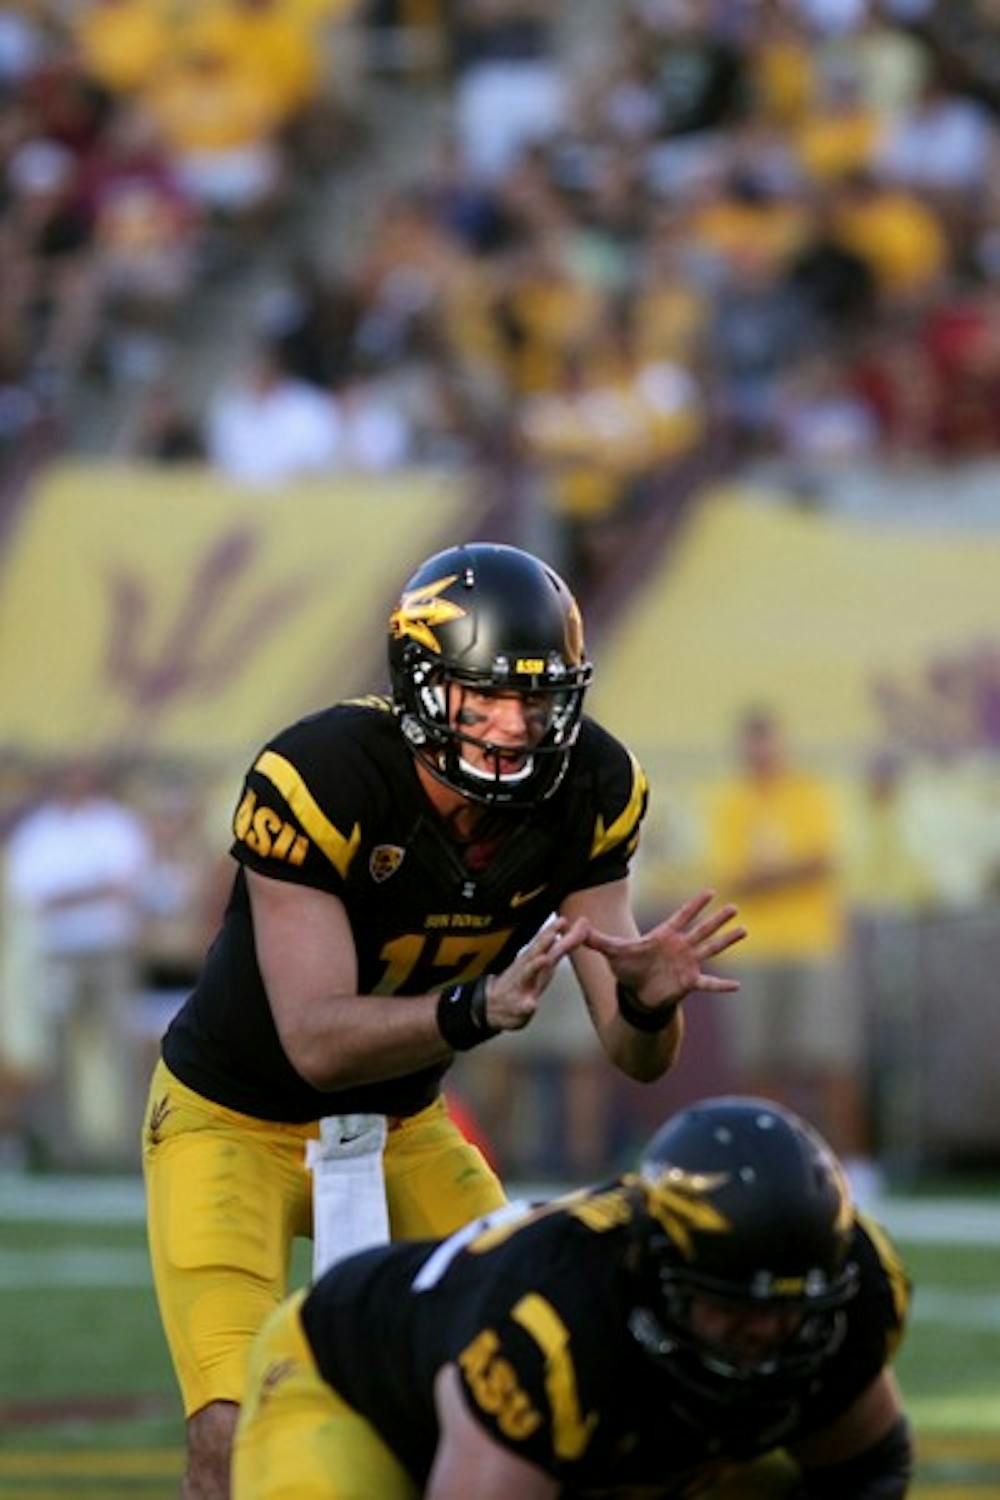 GETTING A GRASP: ASU junior quarterback Brock Osweiler calls for the snap during the Sun Devils’ 48-14 win over Colorado on Saturday. A win over UCLA this Saturday will give ASU the Pac-12 South lead and a ticket to the Pac-12 Championships if they win the rest of their games. (Photo by Lisa Bartoli)